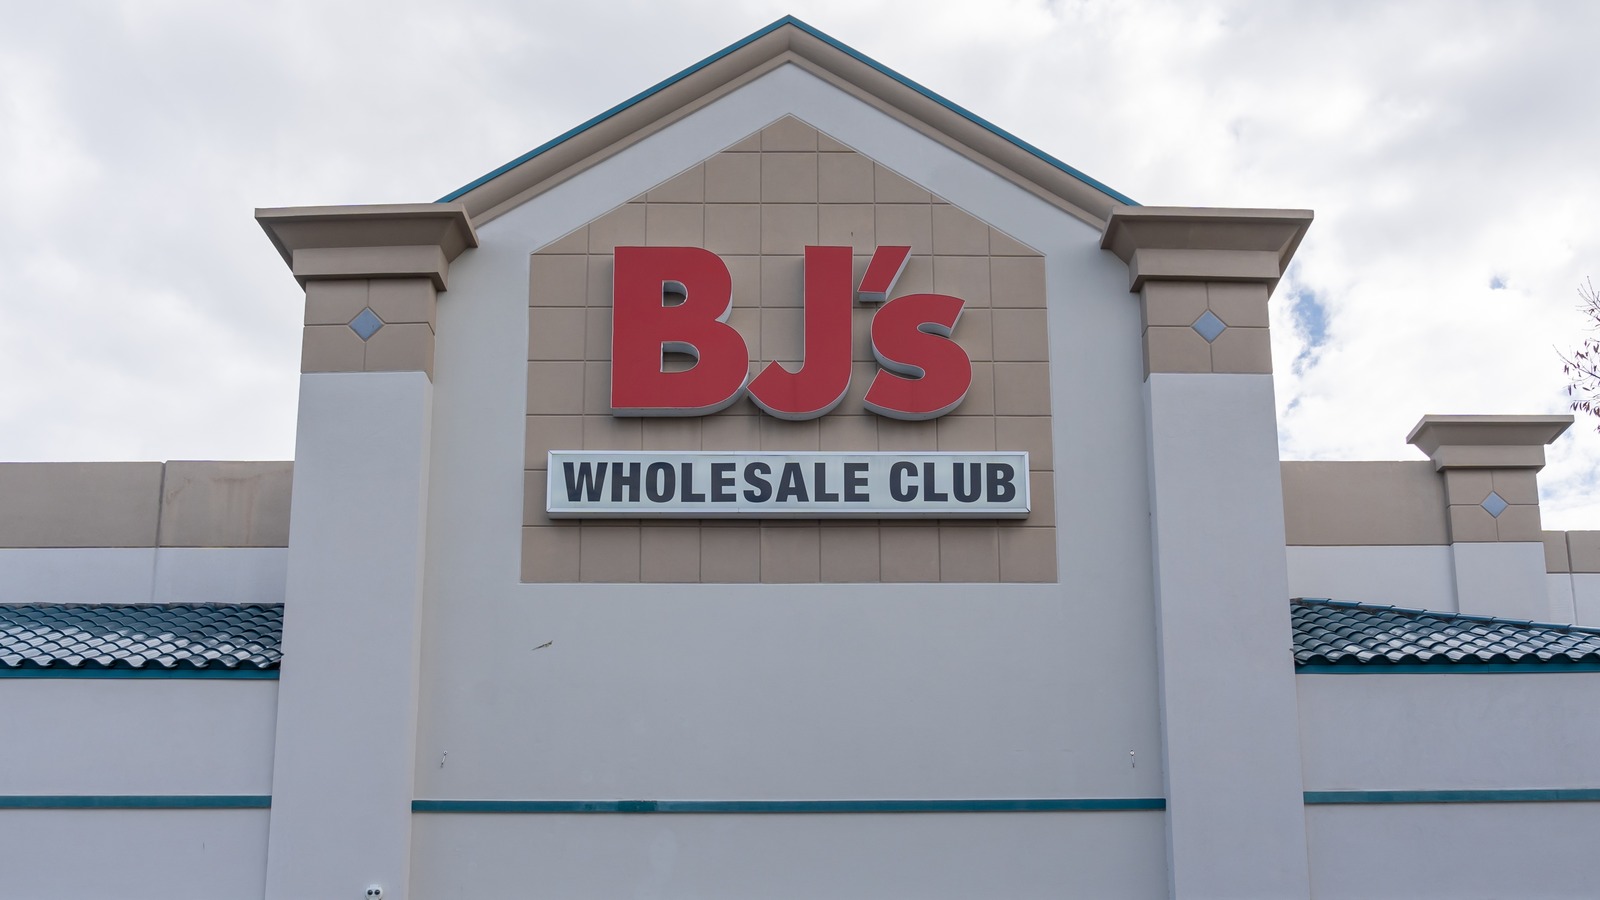 https://www.thedailymeal.com/img/gallery/the-ultimate-guide-to-shopping-at-bjs/l-intro-1681247330.jpg